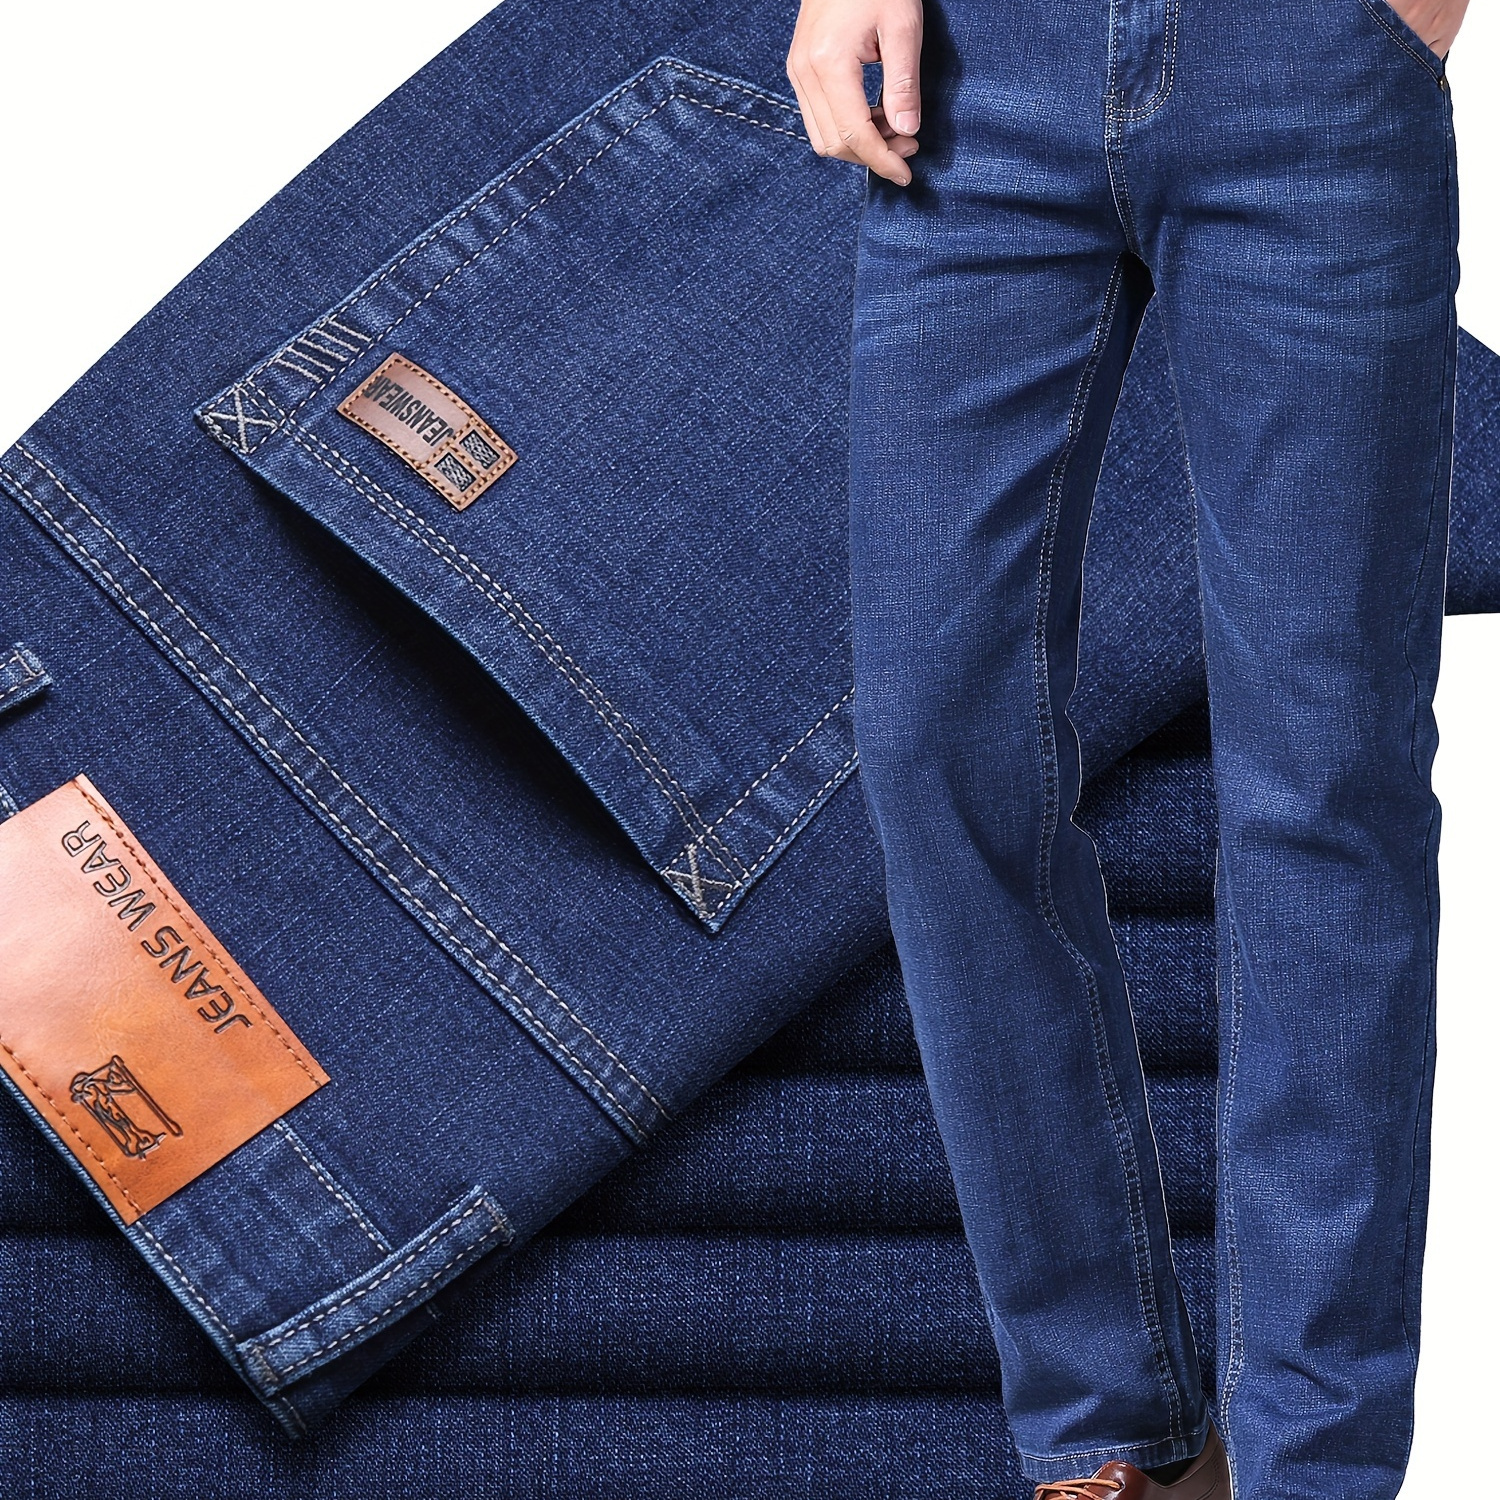 

Men's Solid Washed Denim Pants With Pockets, Casual Breathable Cotton Blend Straight Leg Jeans For Outdoor Activities Gift